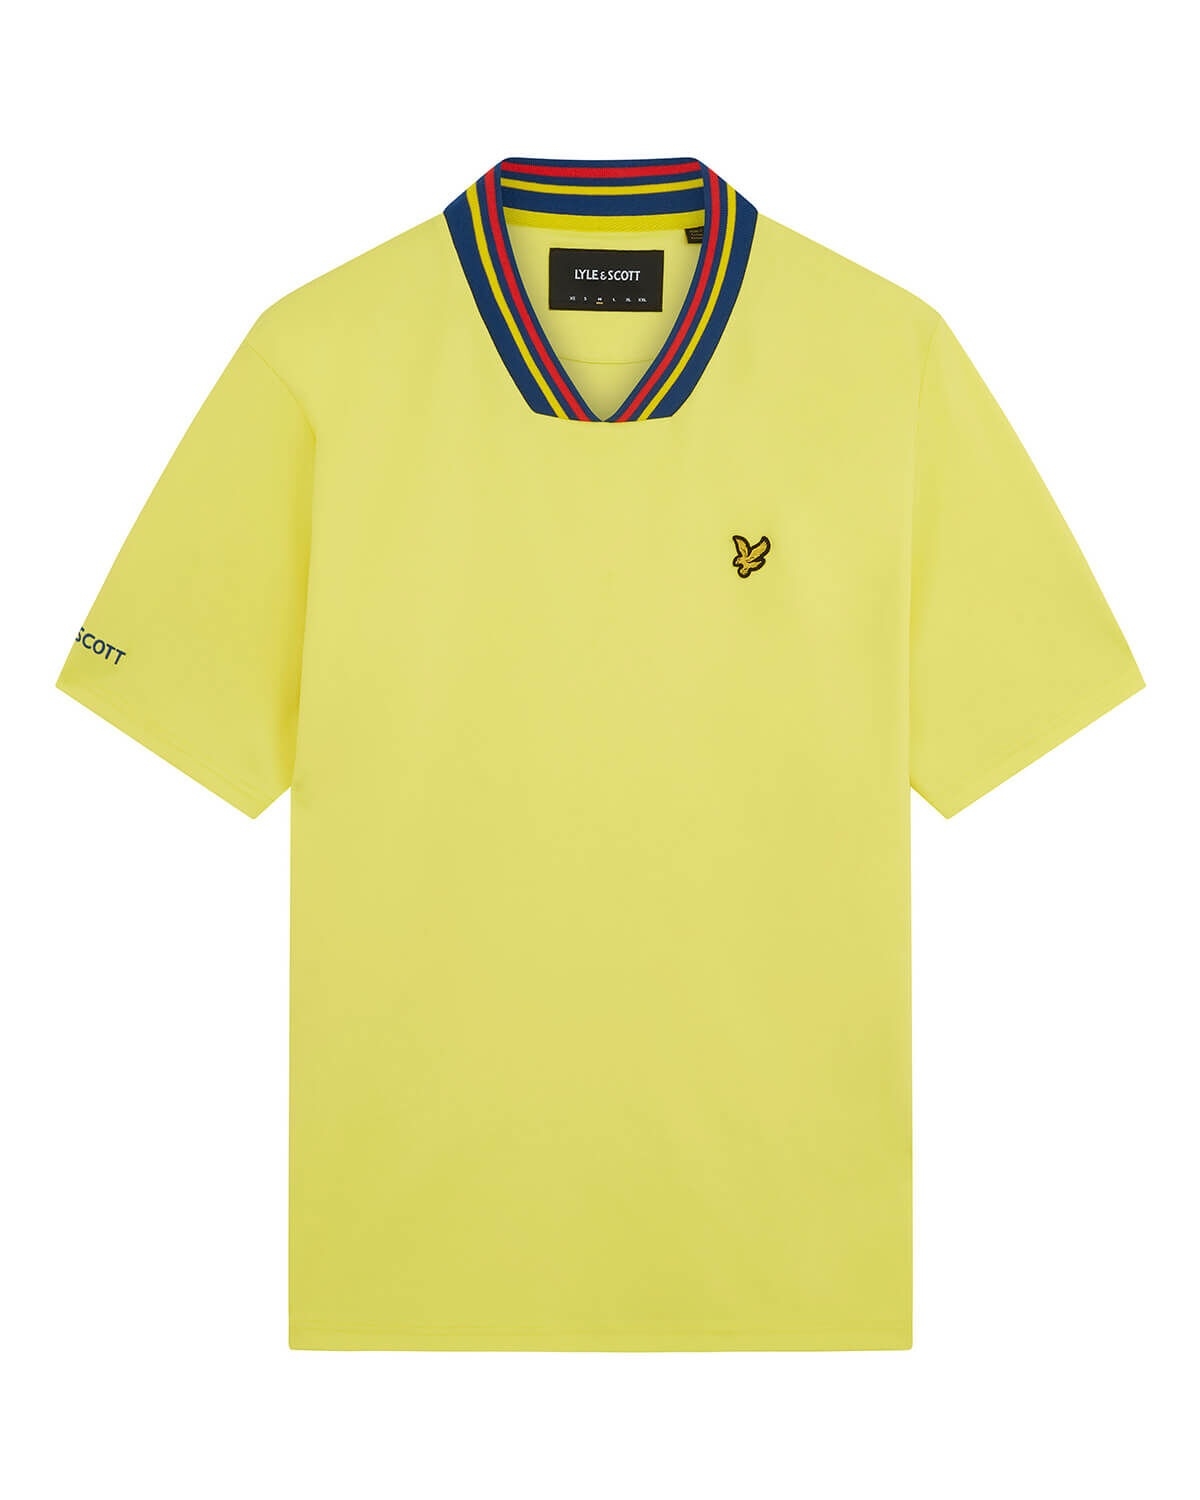 Lyle and Scott Sweden Football Polo Shirt Yellow